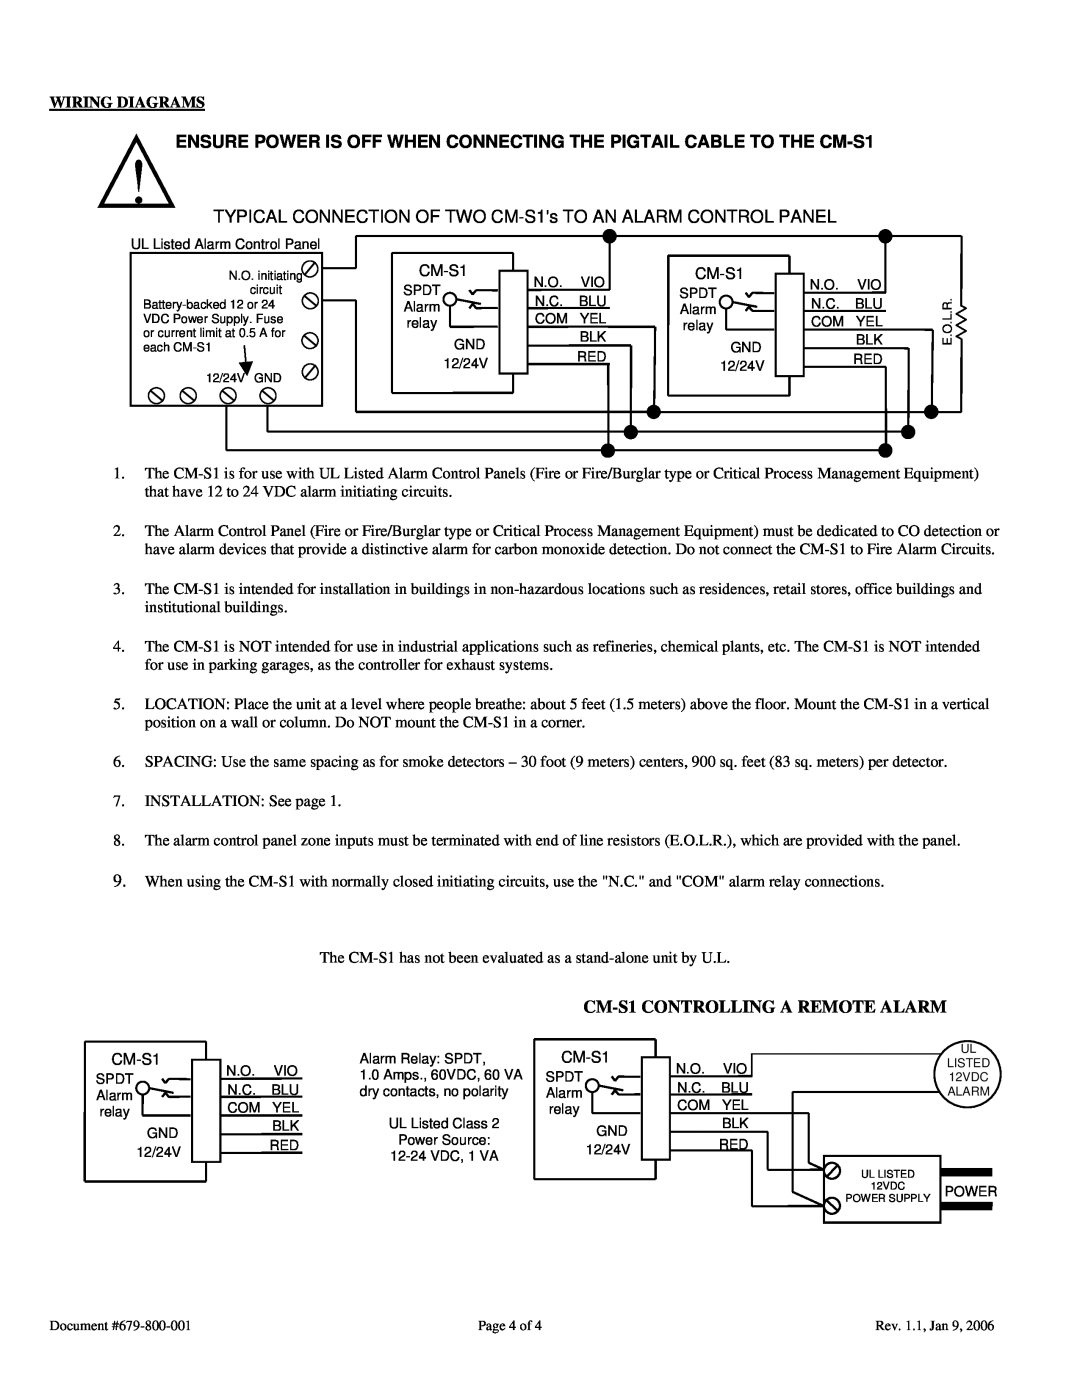 Macurco specifications Wiring Diagrams, CM-S1CONTROLLING A REMOTE ALARM 